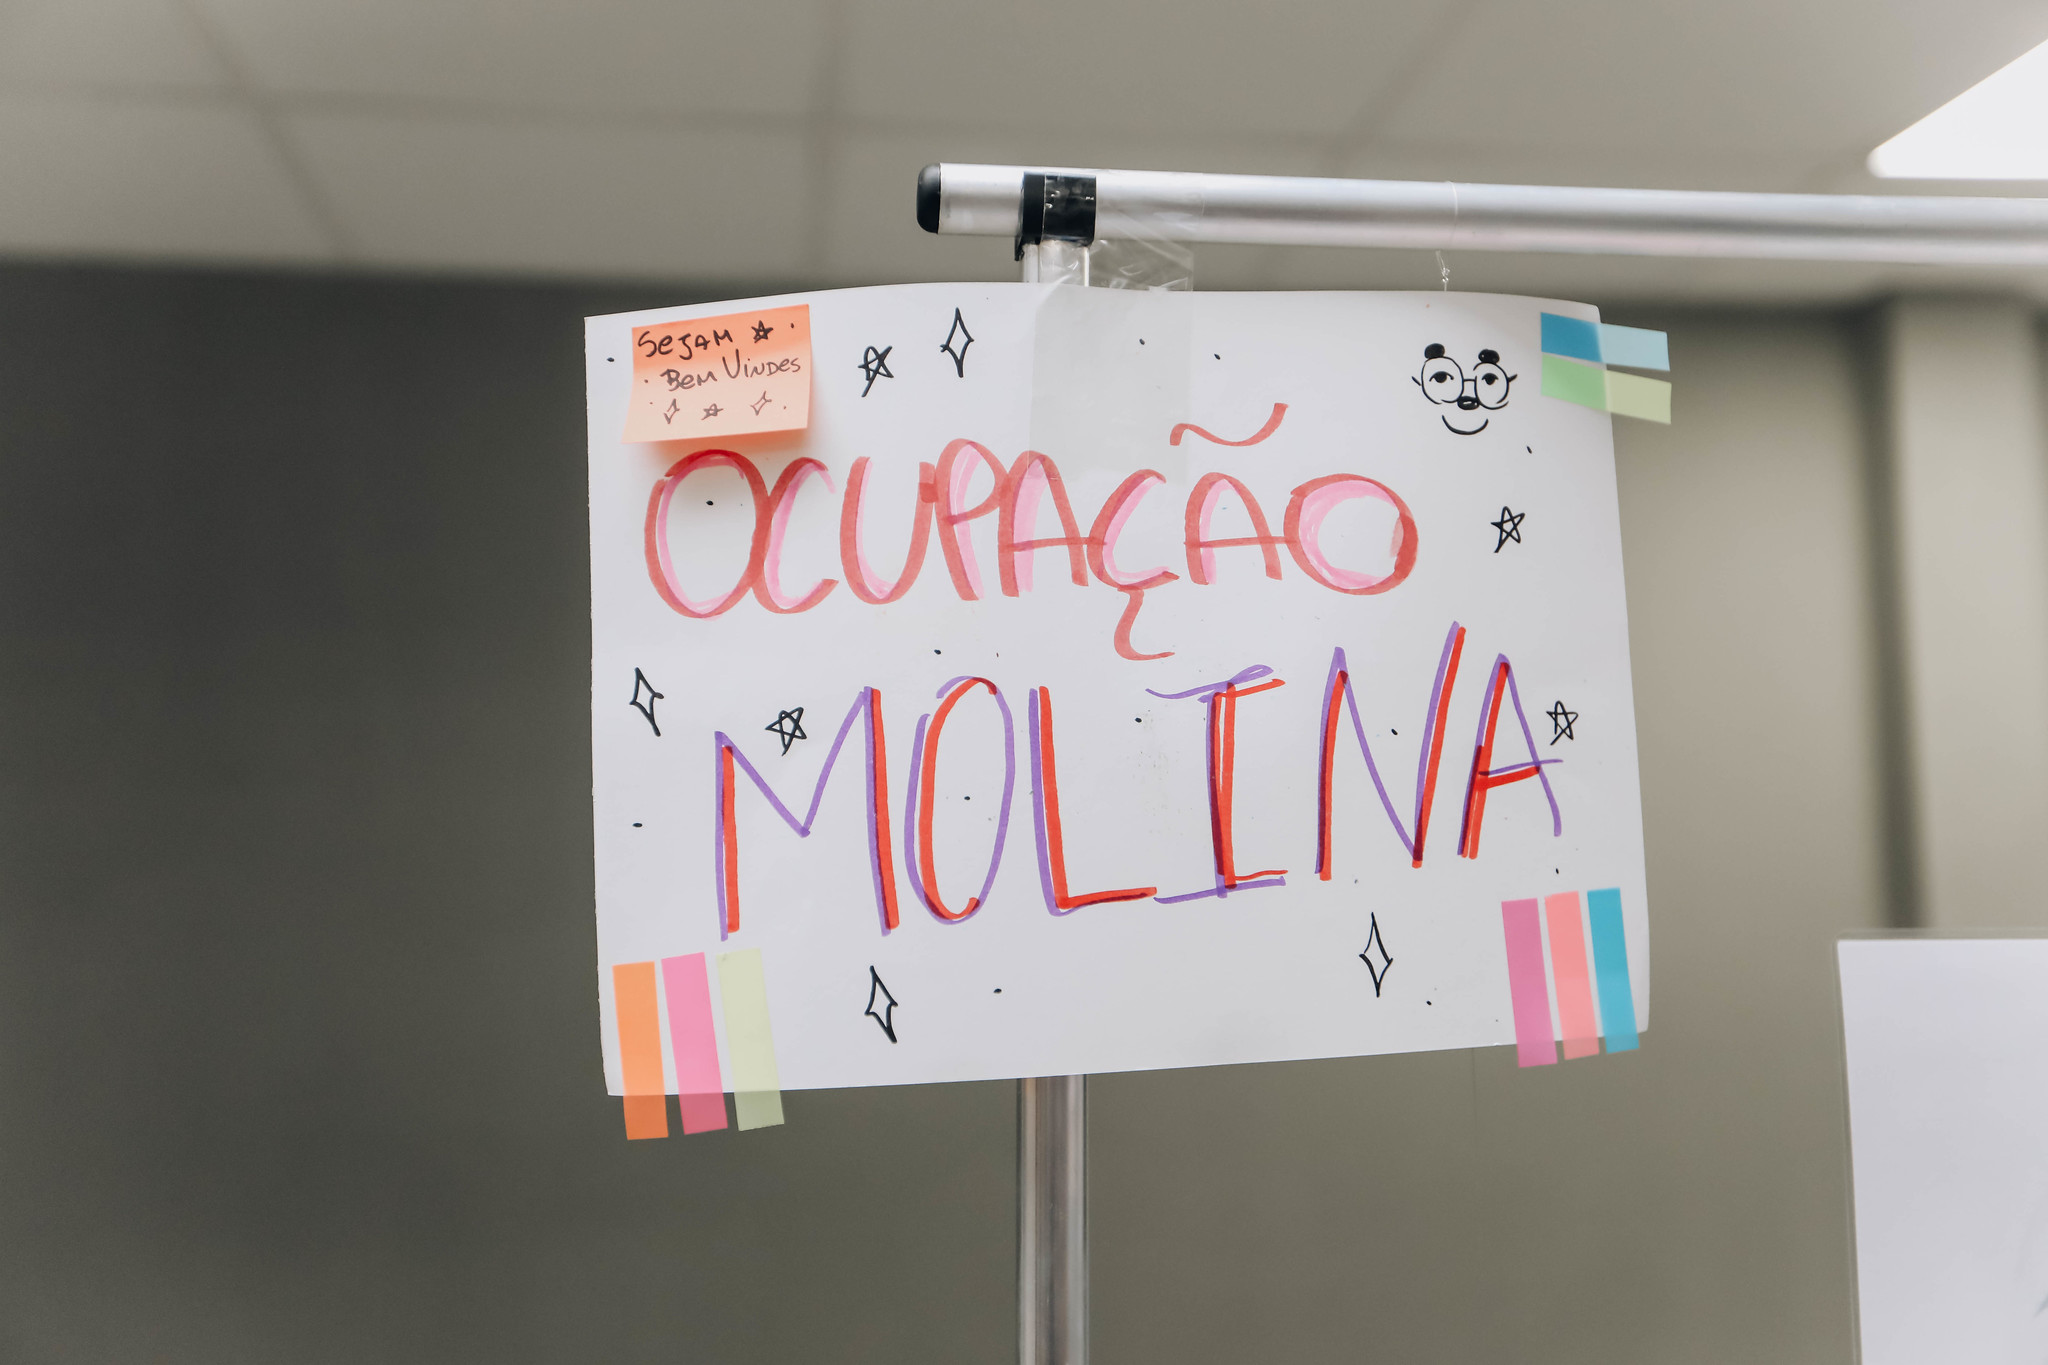 Ocupao Molina<a style='float:right' href='https://www3.al.sp.gov.br/repositorio/noticia/N-06-2024/fg329786.jpg' target=_blank><img src='/_img/material-file-download-white.png' width='14px' alt='Clique para baixar a imagem'></a>